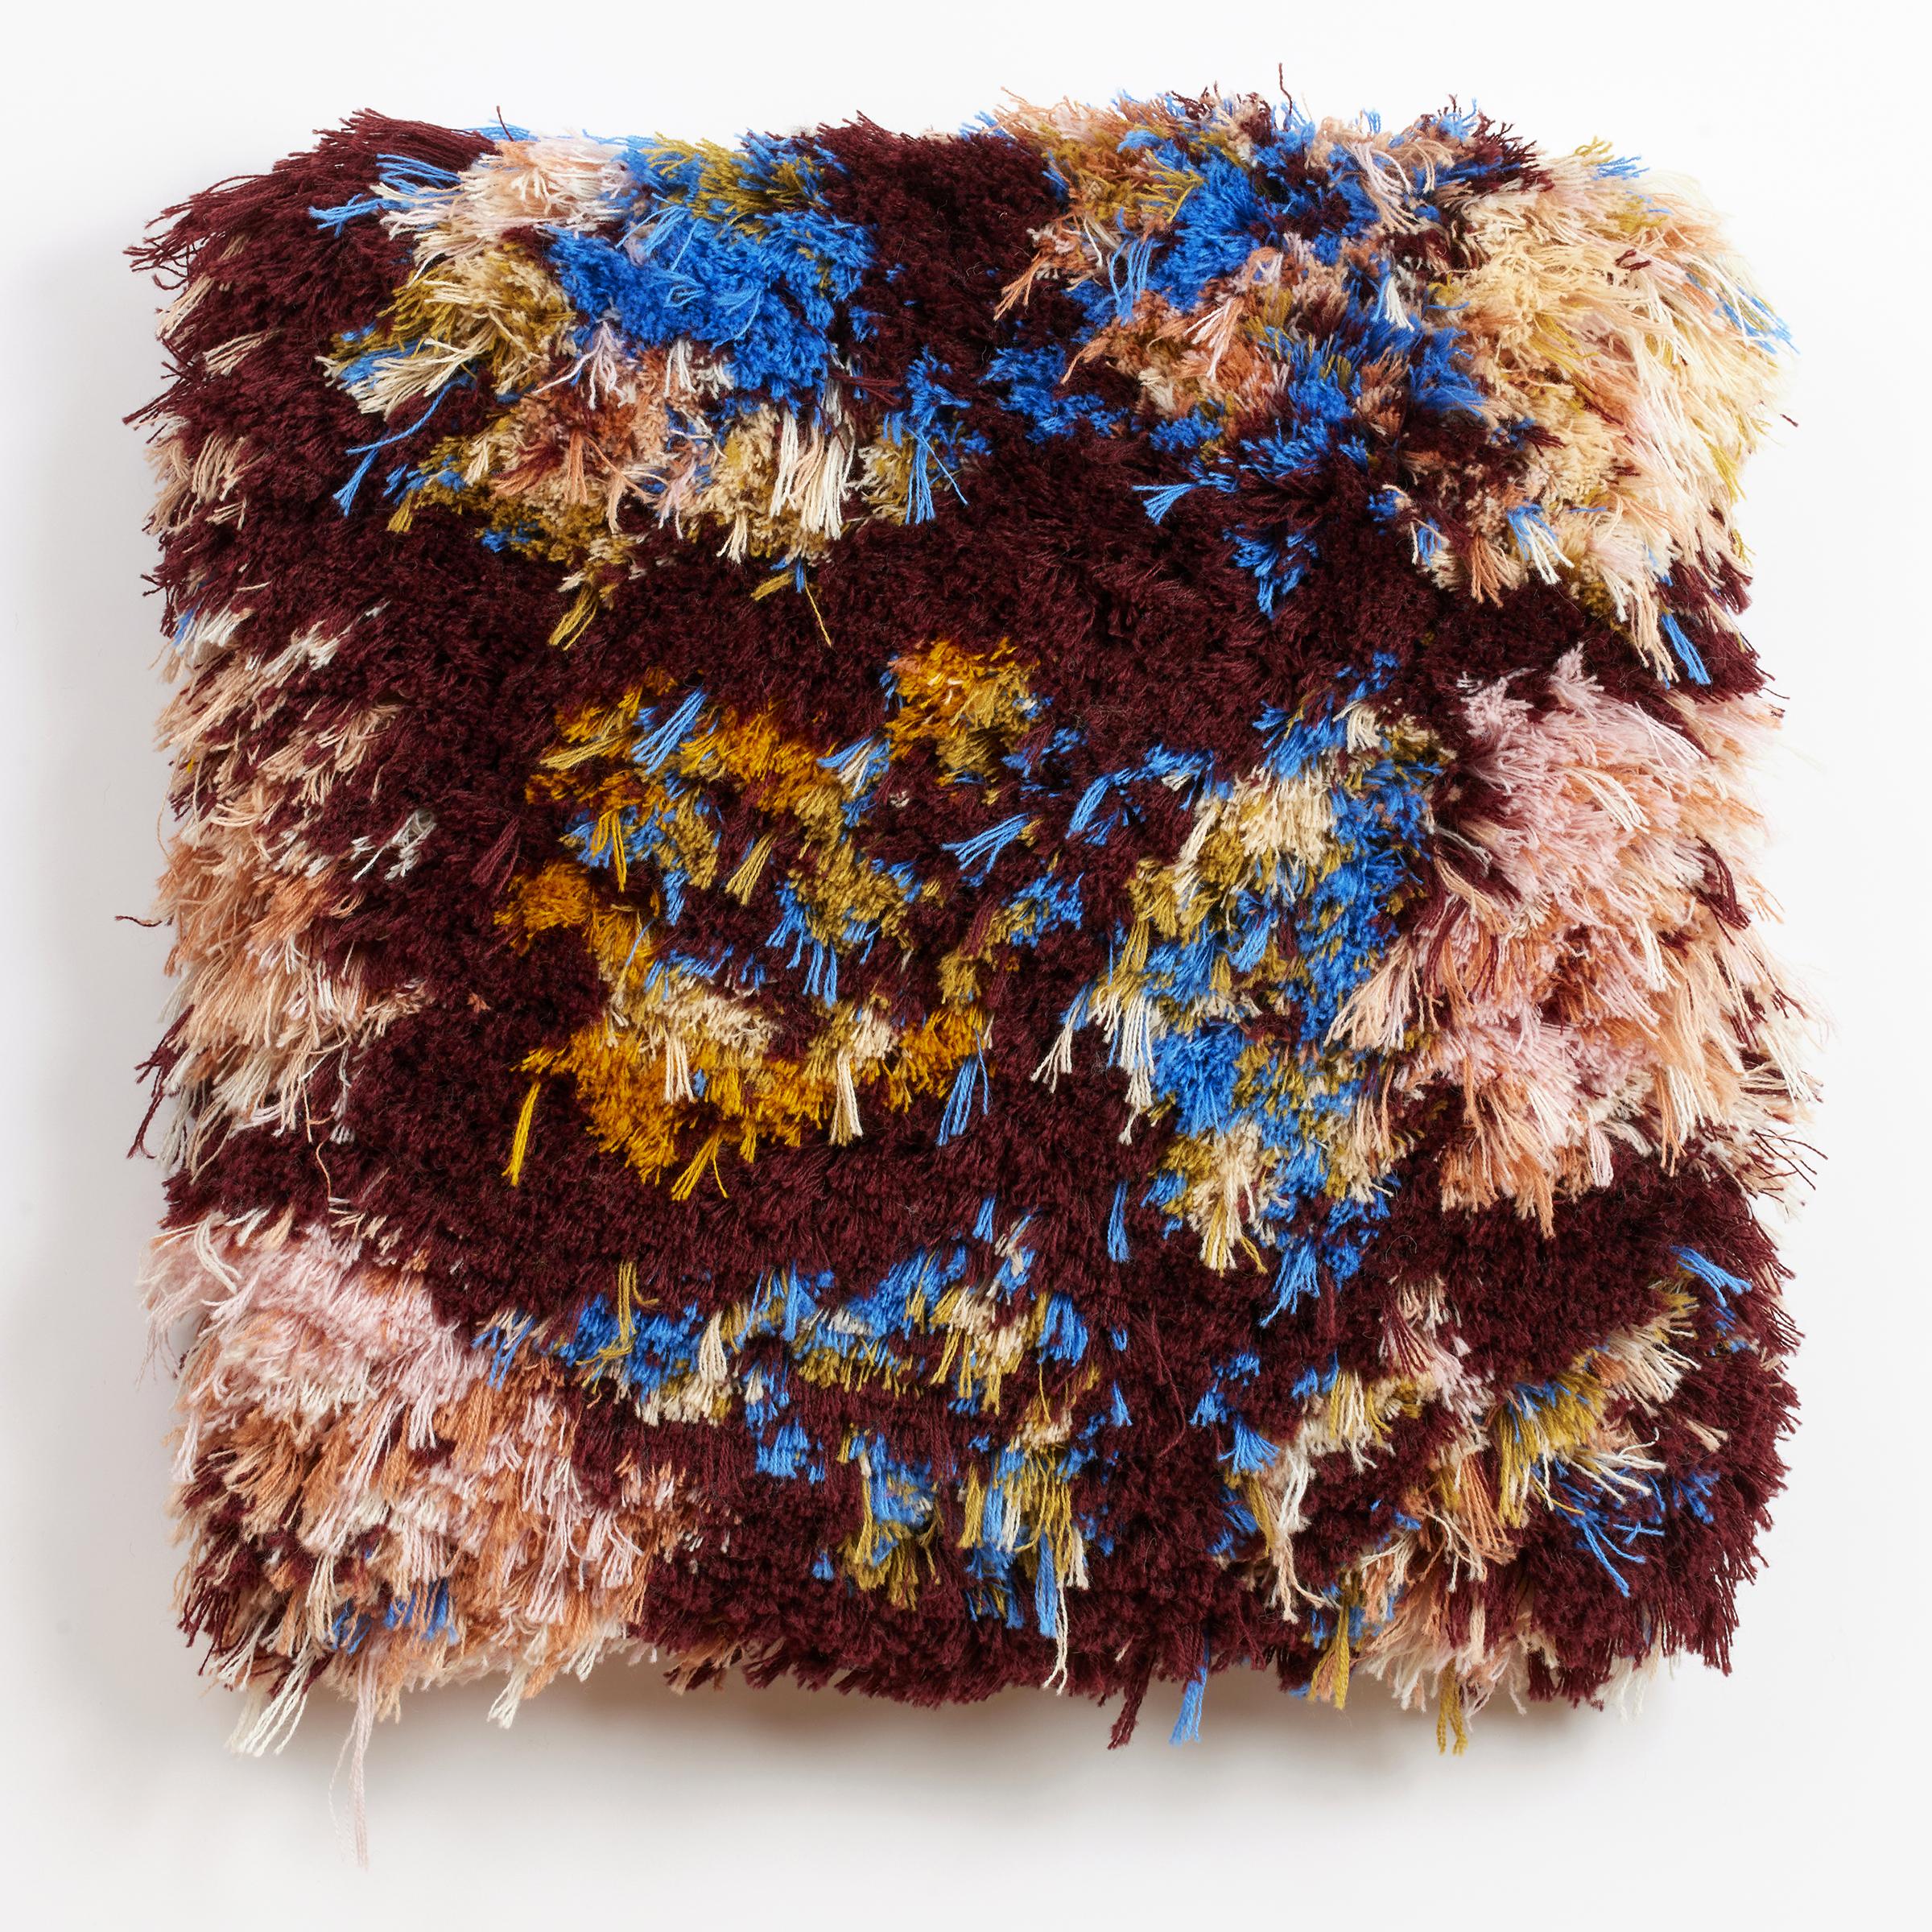 Trish Andersen Abstract Sculpture - 'Hand in Hand' - contemporary fiber art, texture, pattern, dots, tufting